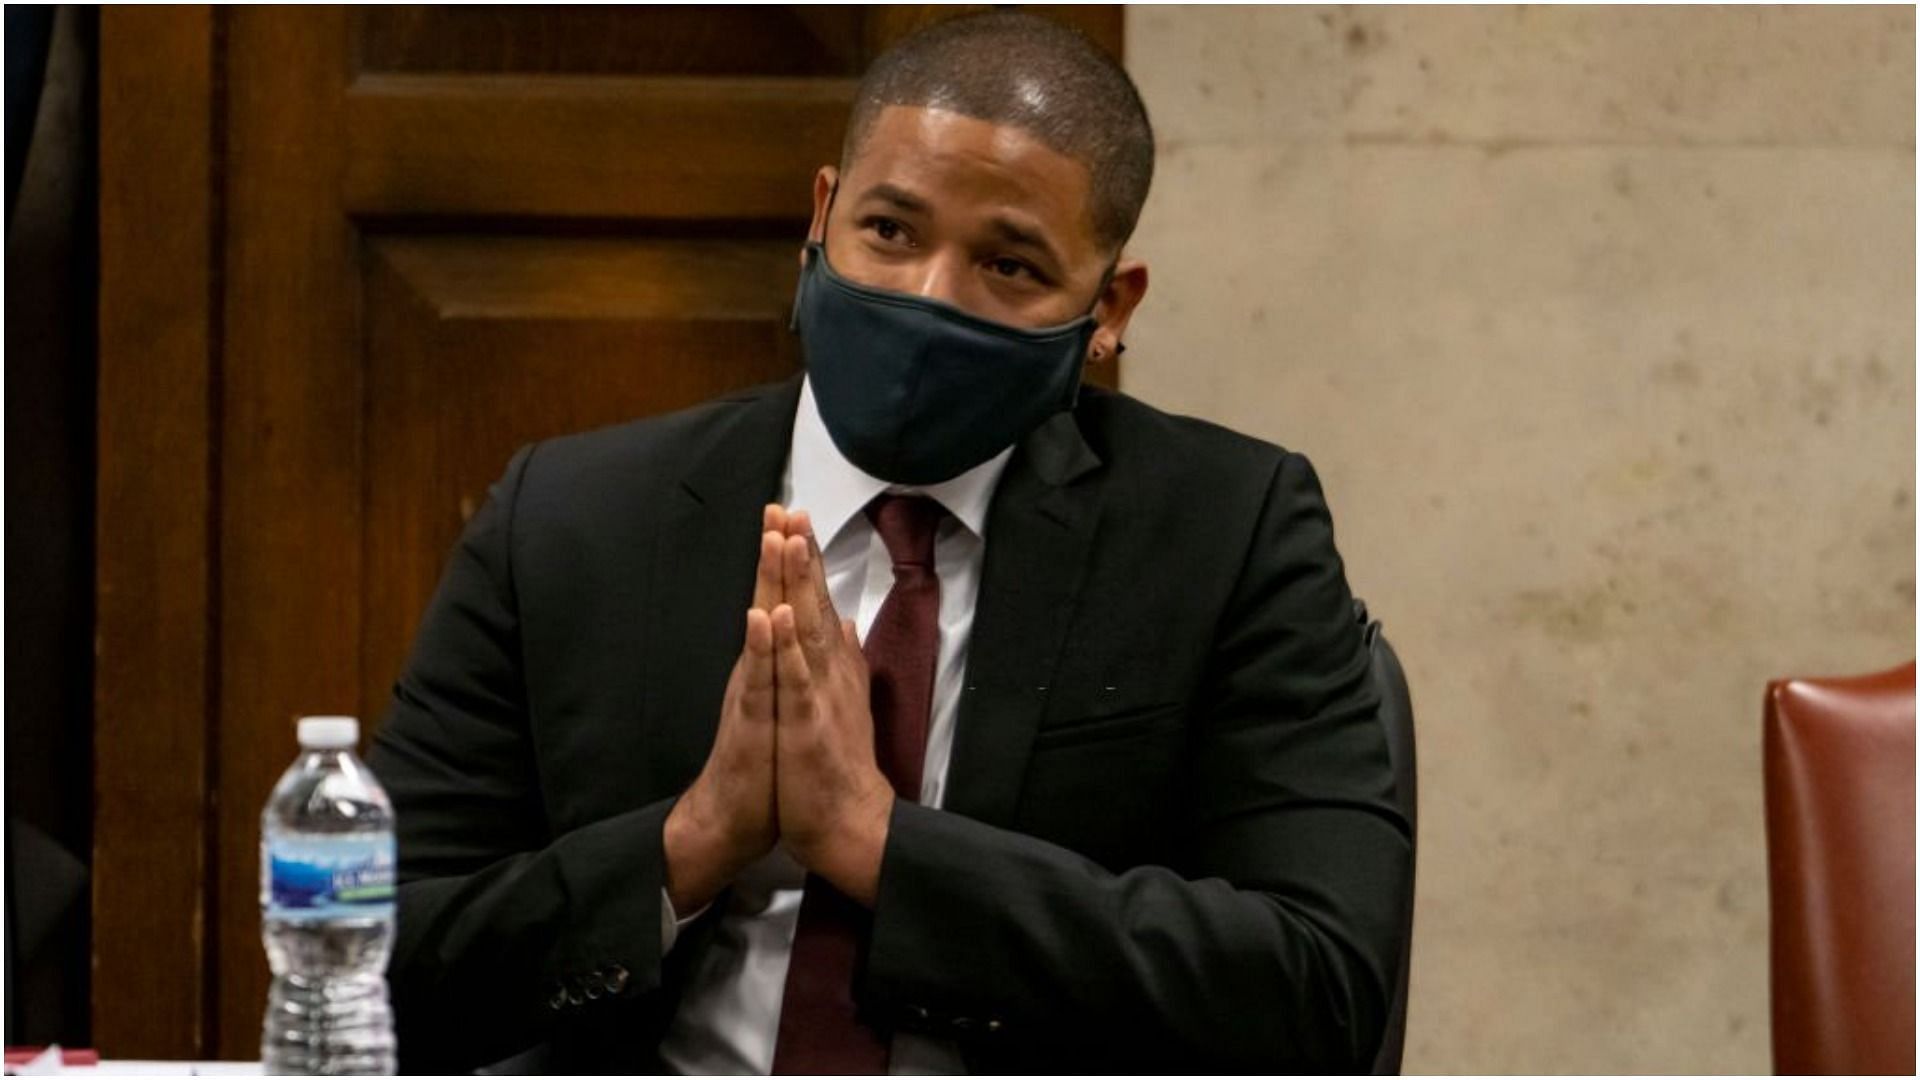 Jussie Smollett listens as his grandmother Molly testifies at his sentencing hearing (Image via Getty Images/Brian Cassella-Pool)